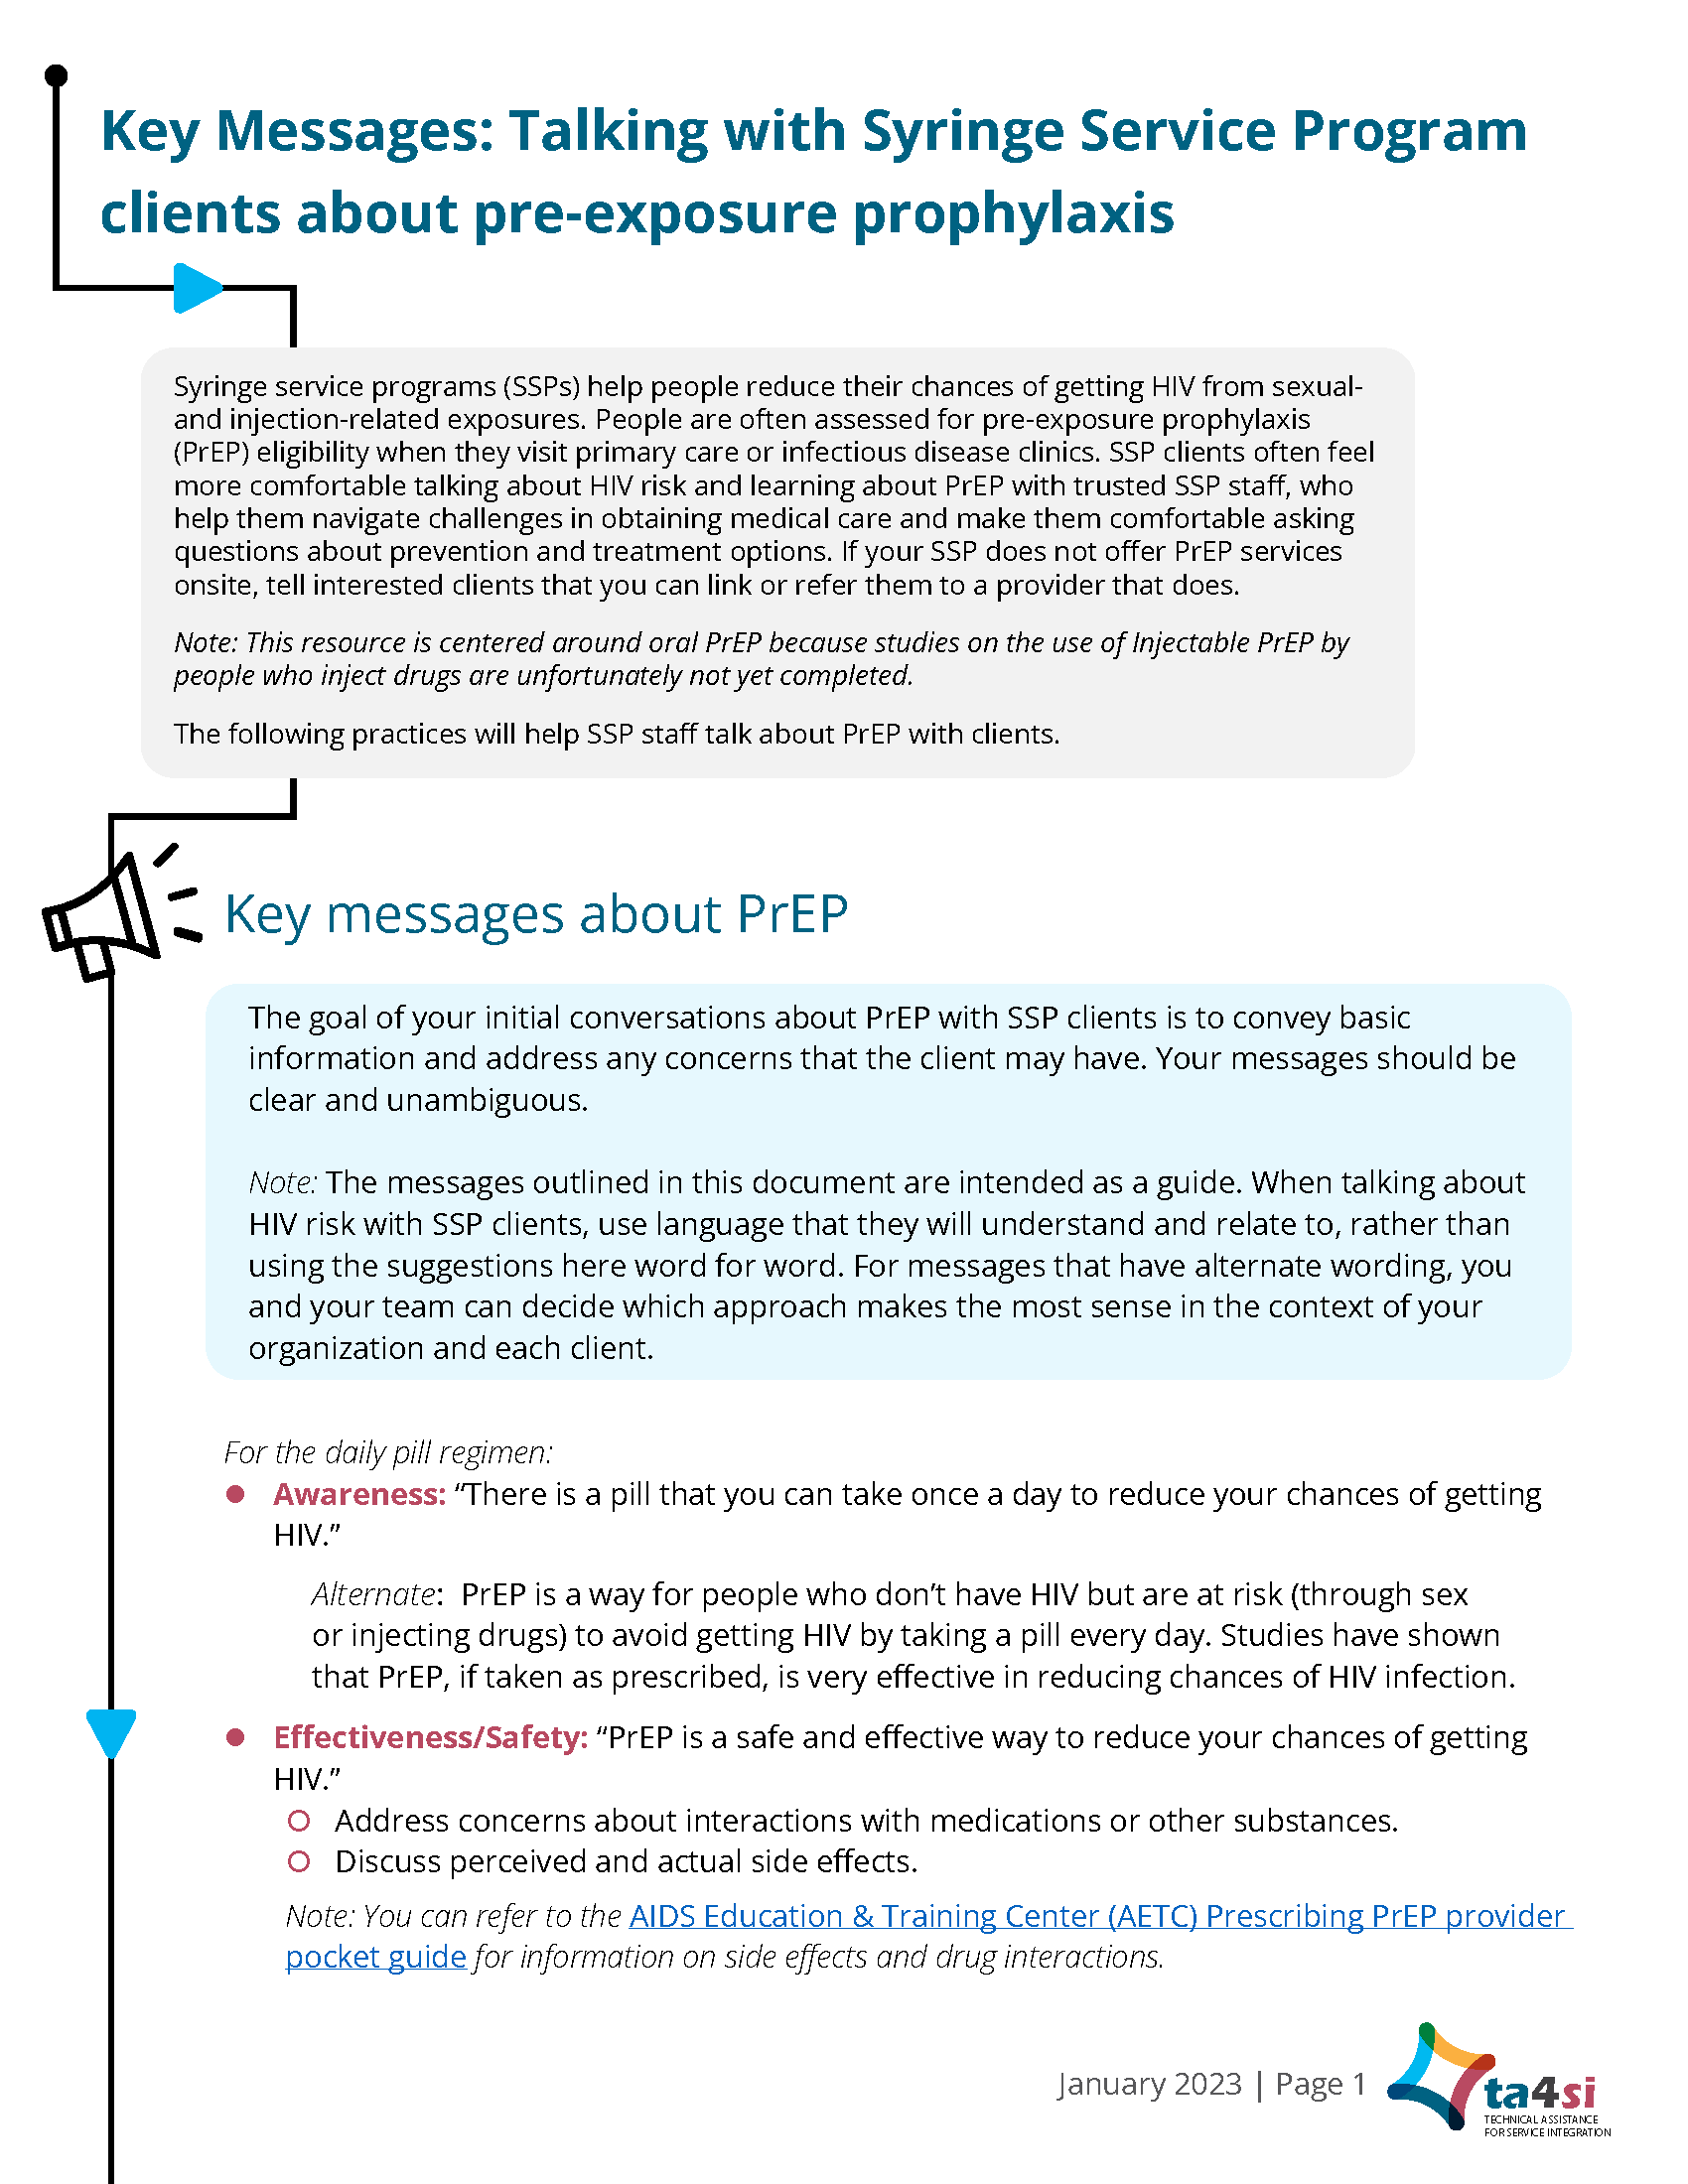 Key Messages: Talking with Syringe Service Program clients about pre-exposure prophylaxis